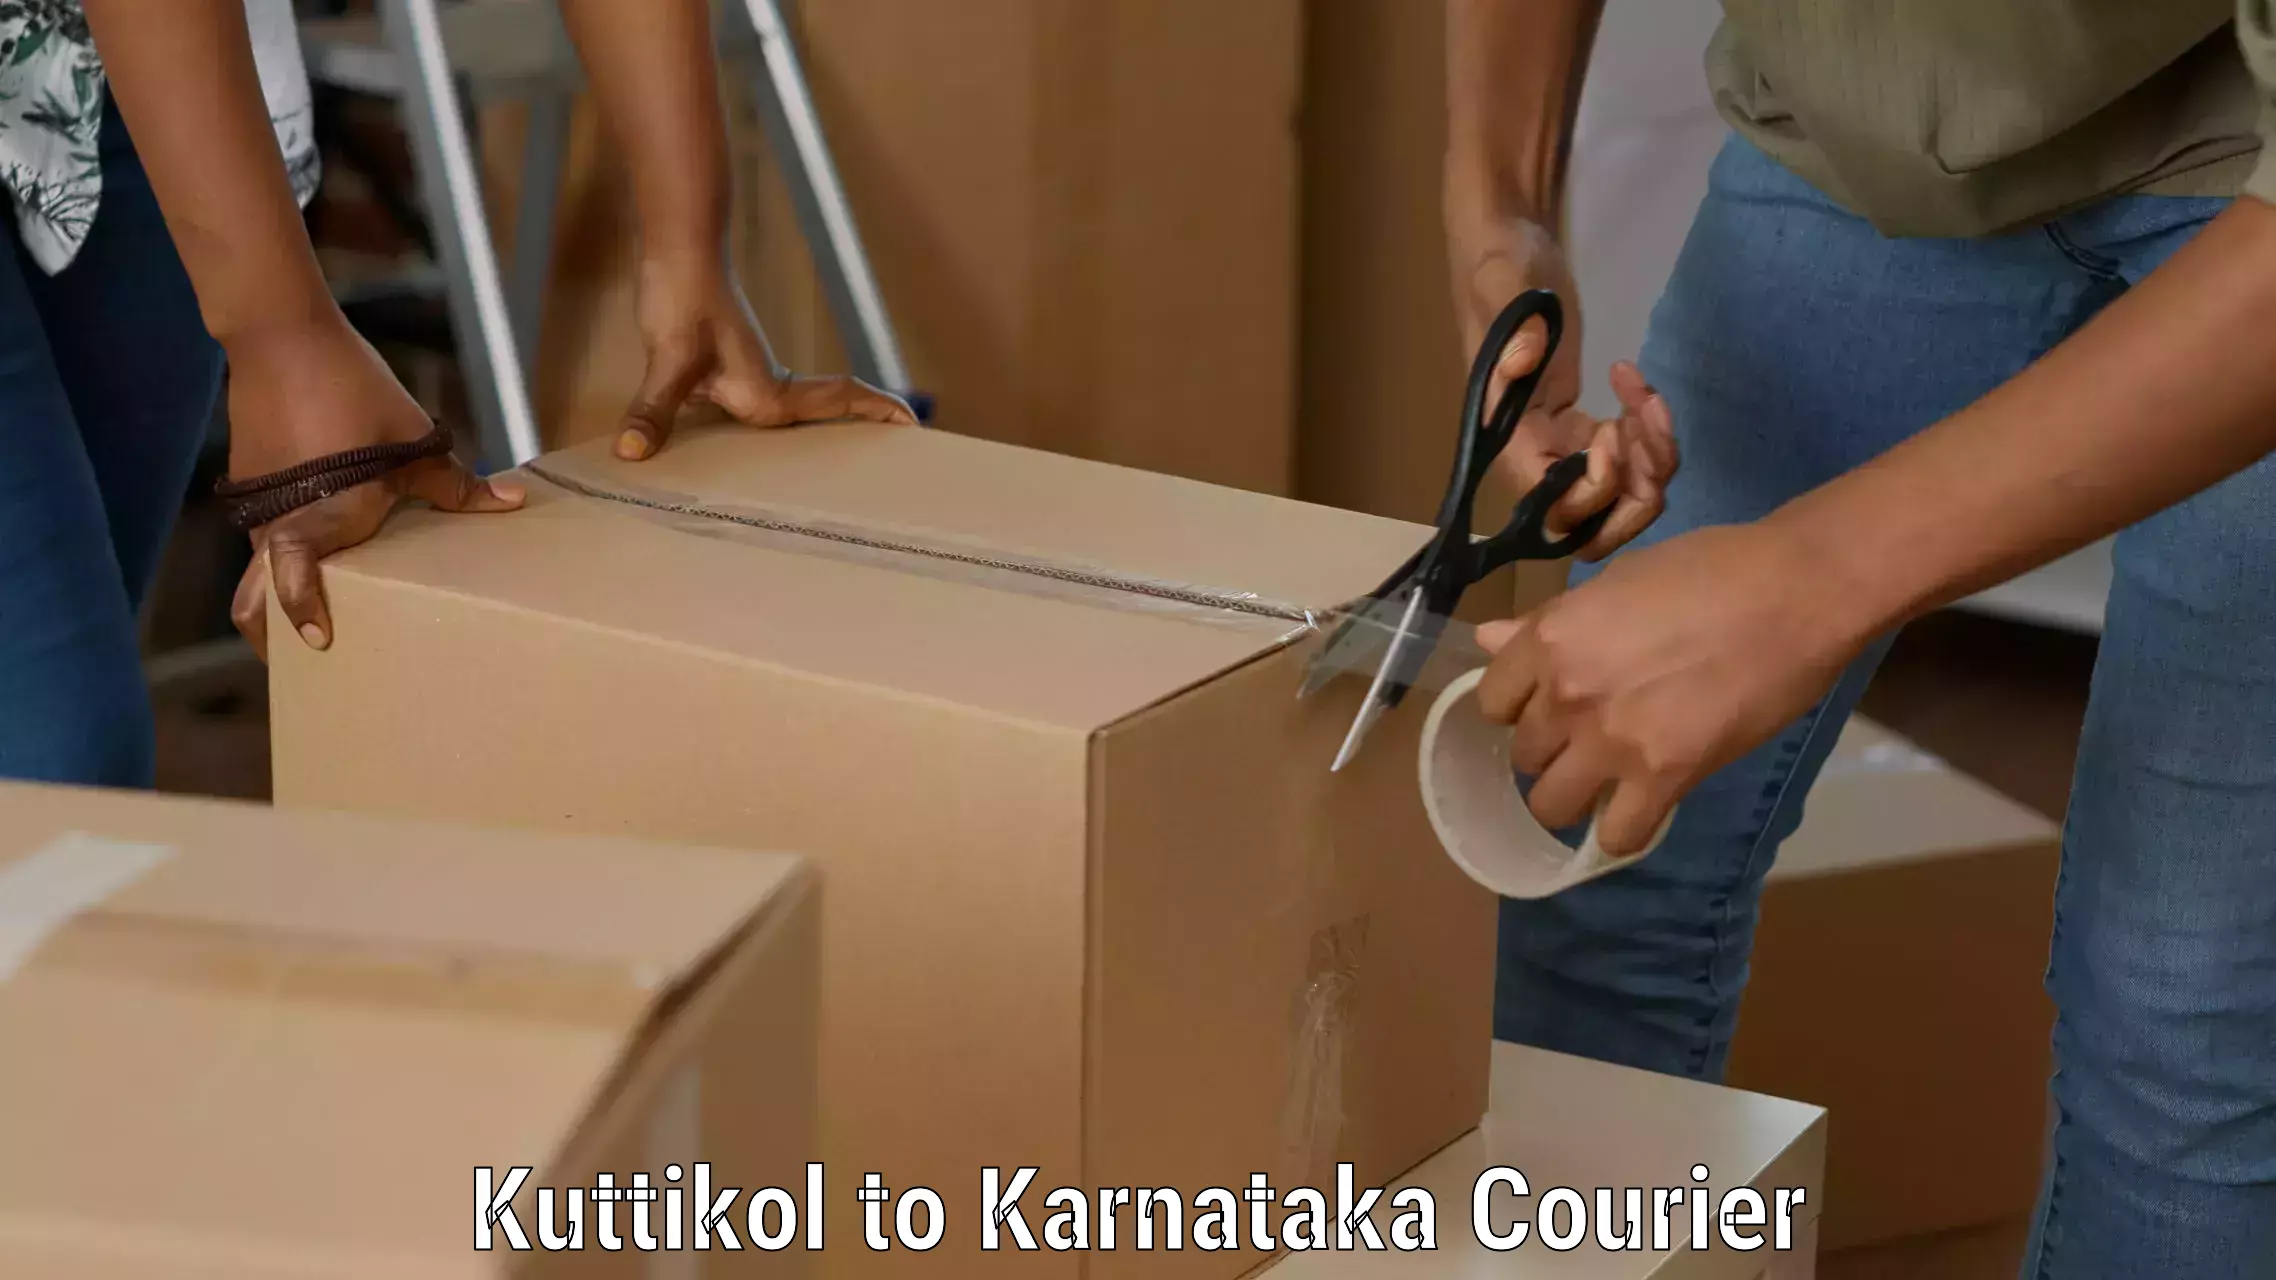 Reliable courier service Kuttikol to Yellare